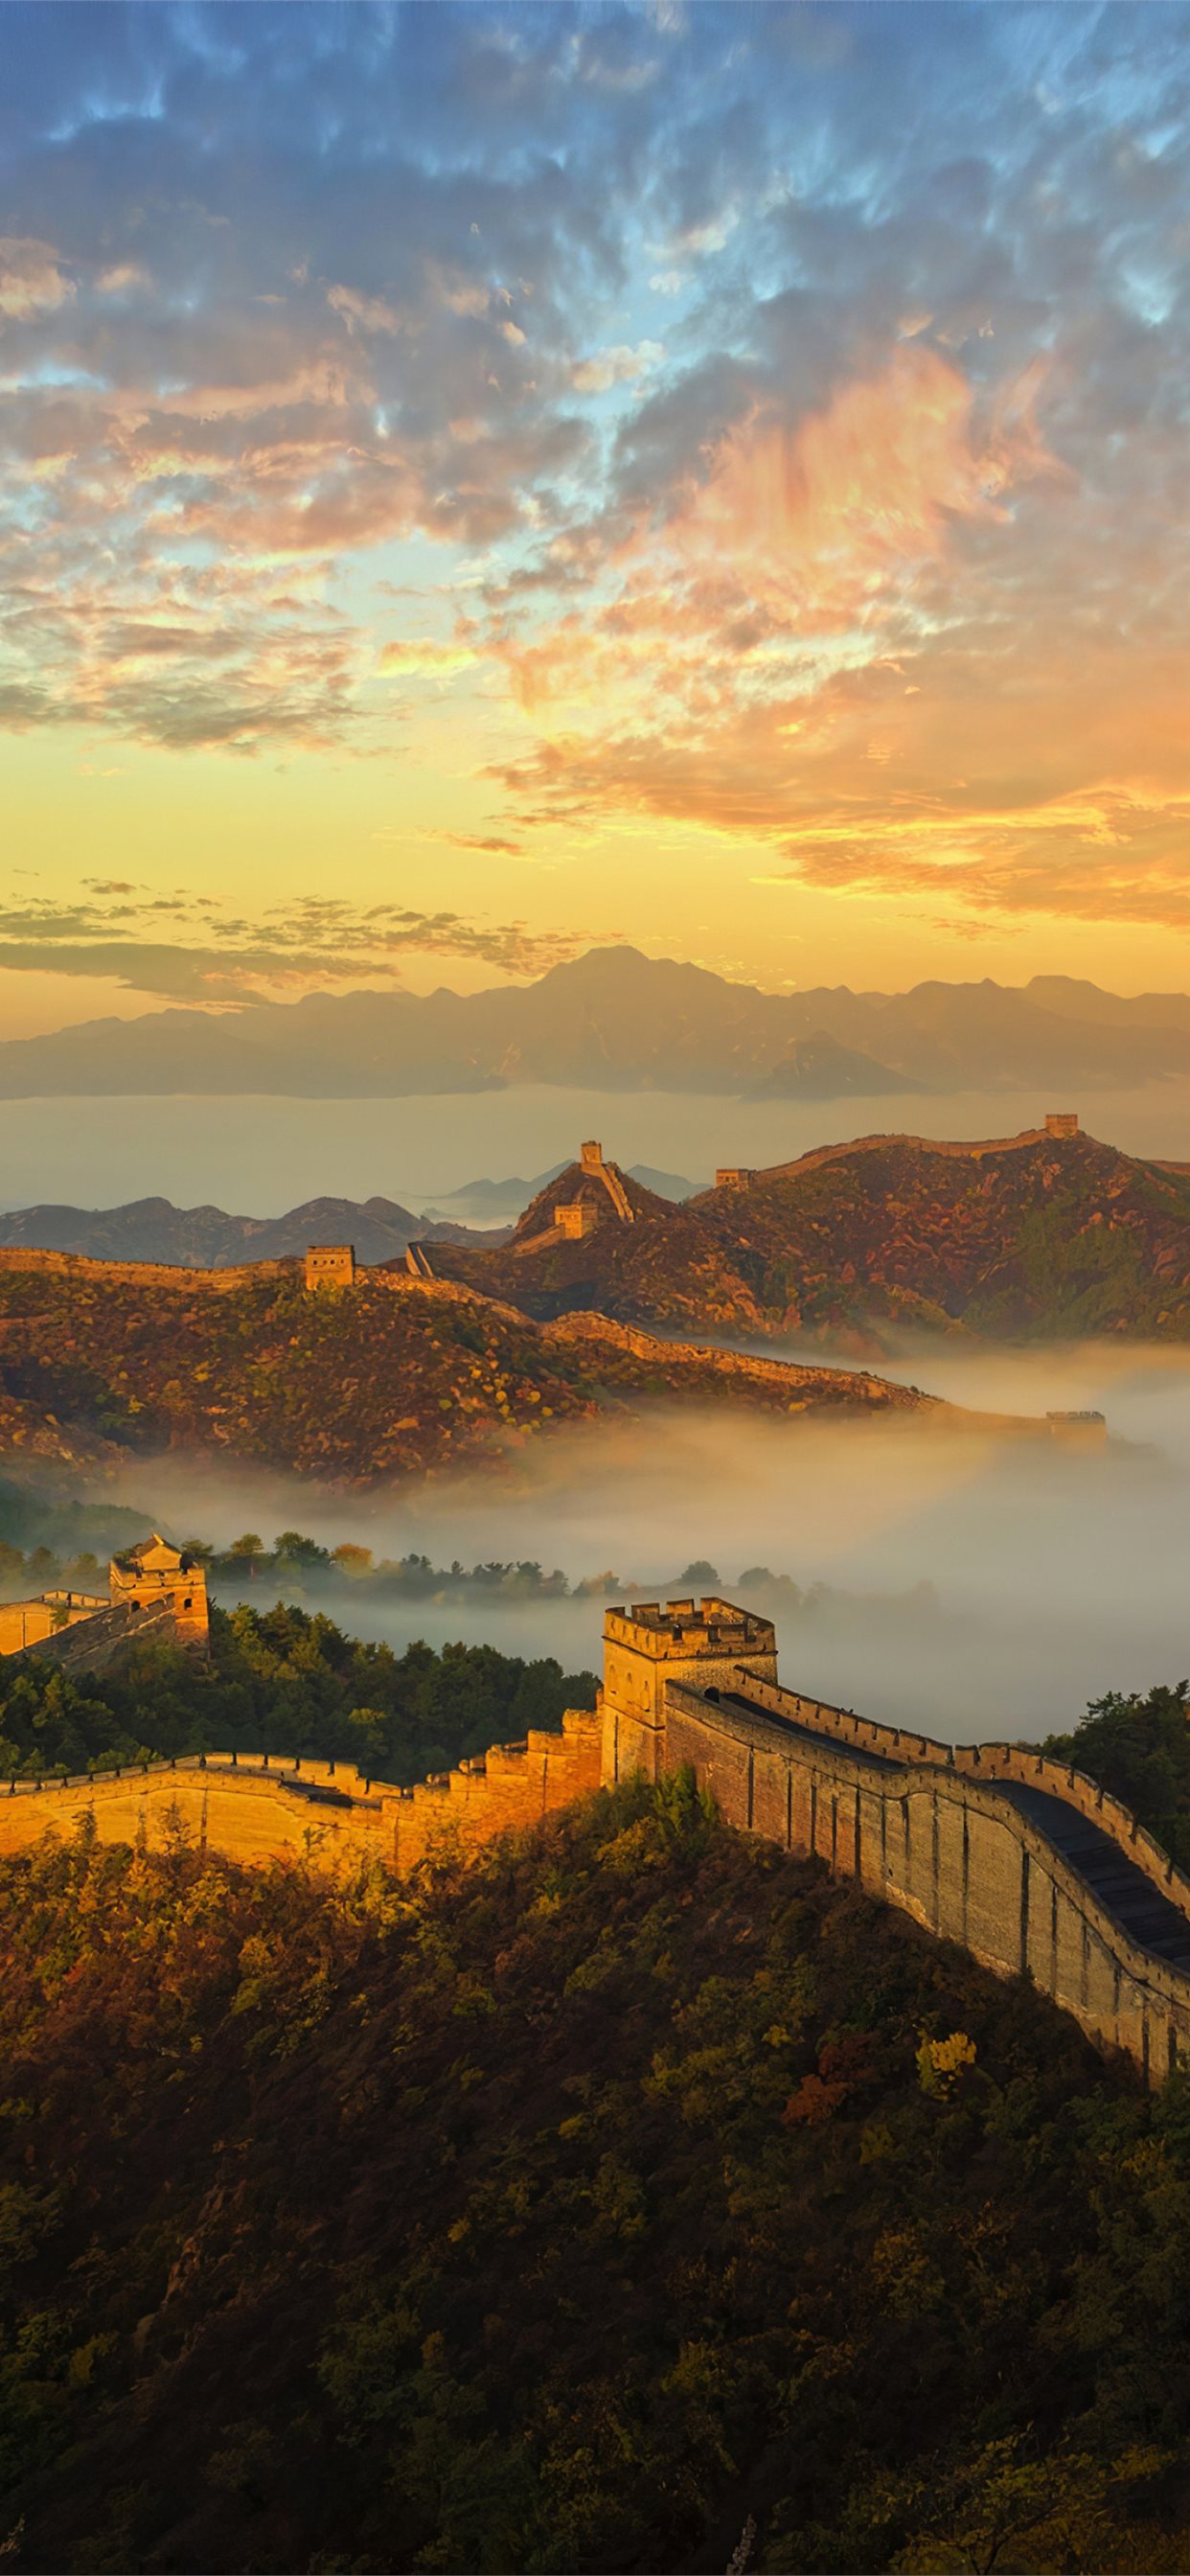 Great Wall Of China 4k Samsung Galaxy Note 9 8 S9 ... iPhone X Wallpapers  Free Download